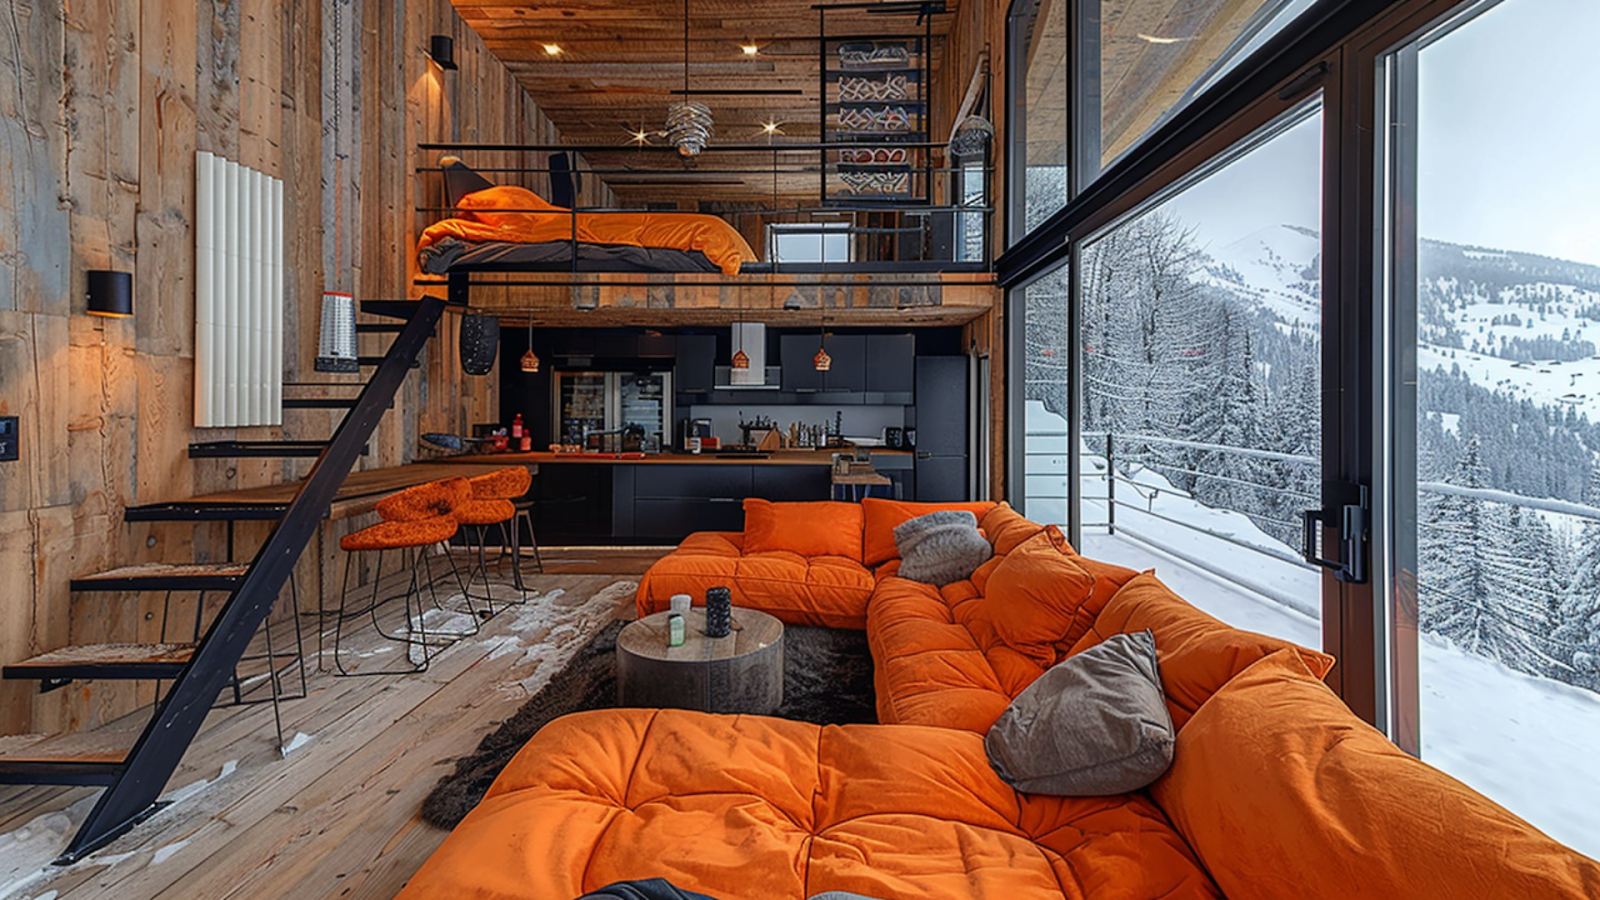 A luxurious, loft-style ski chalet in Courchevel, France.